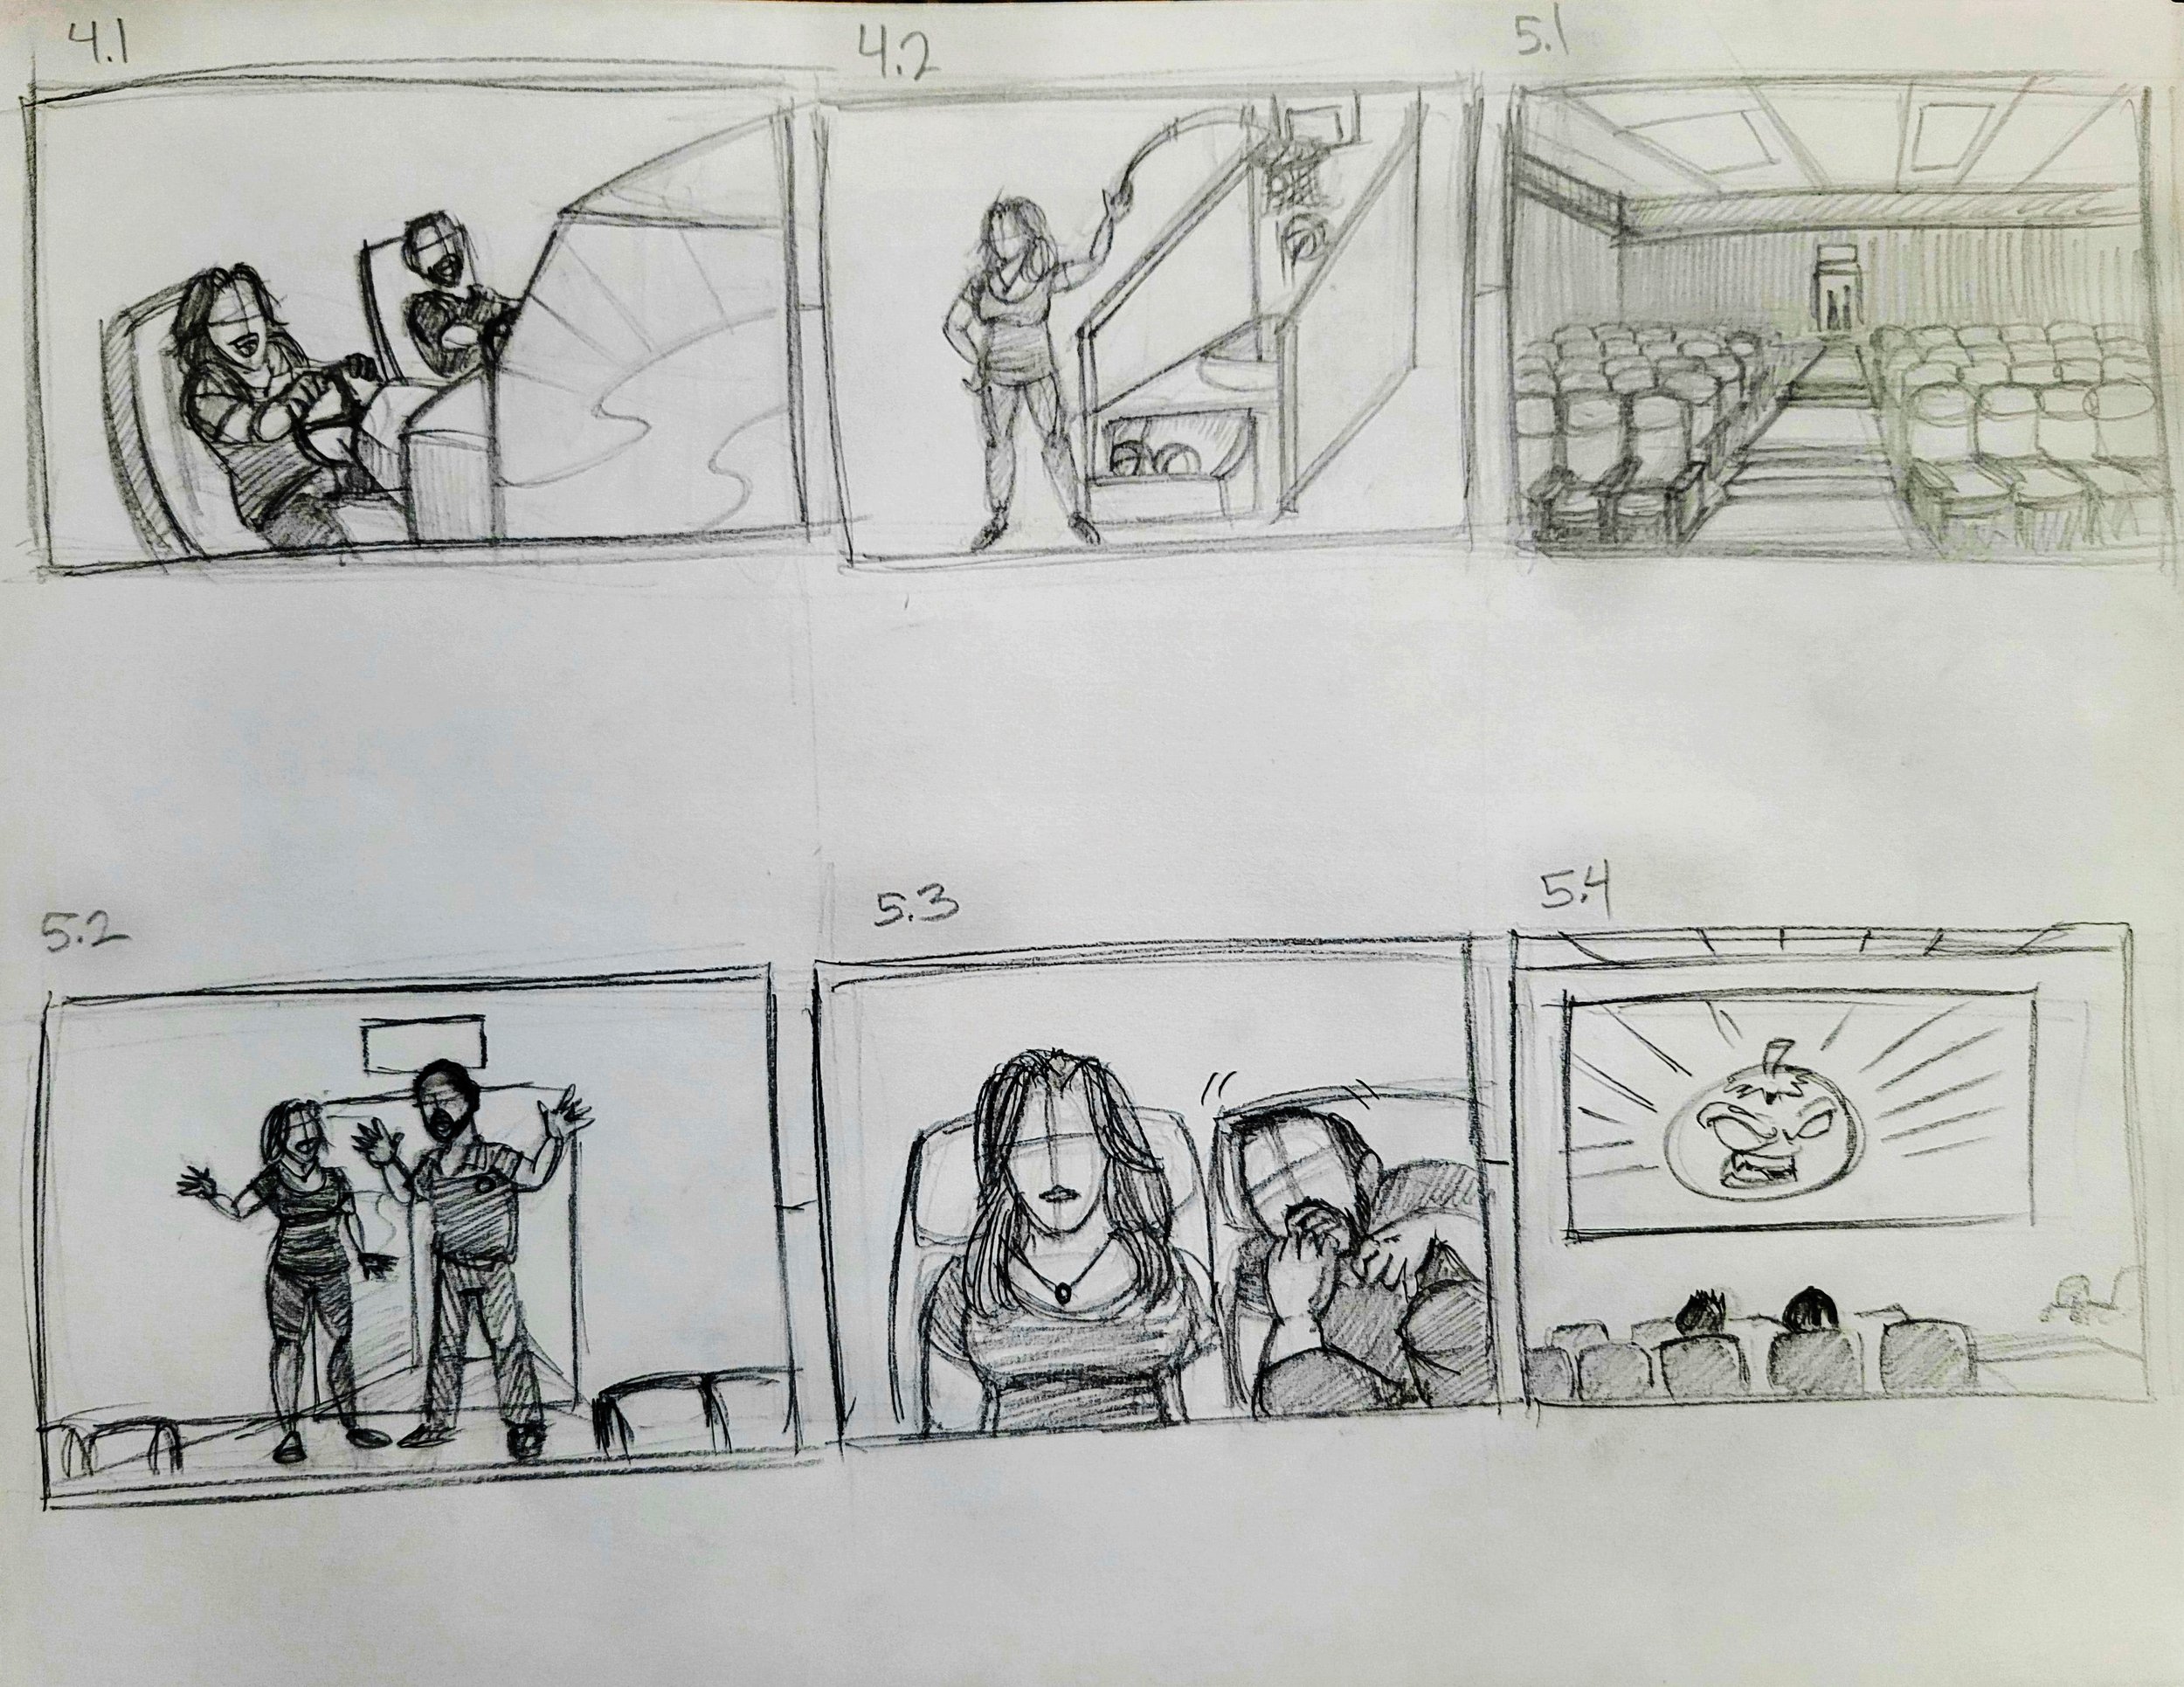 WR_Real_Suite_Eats_S1_E2_StoryBoard_Frames_4_1_to_5_4.jpg